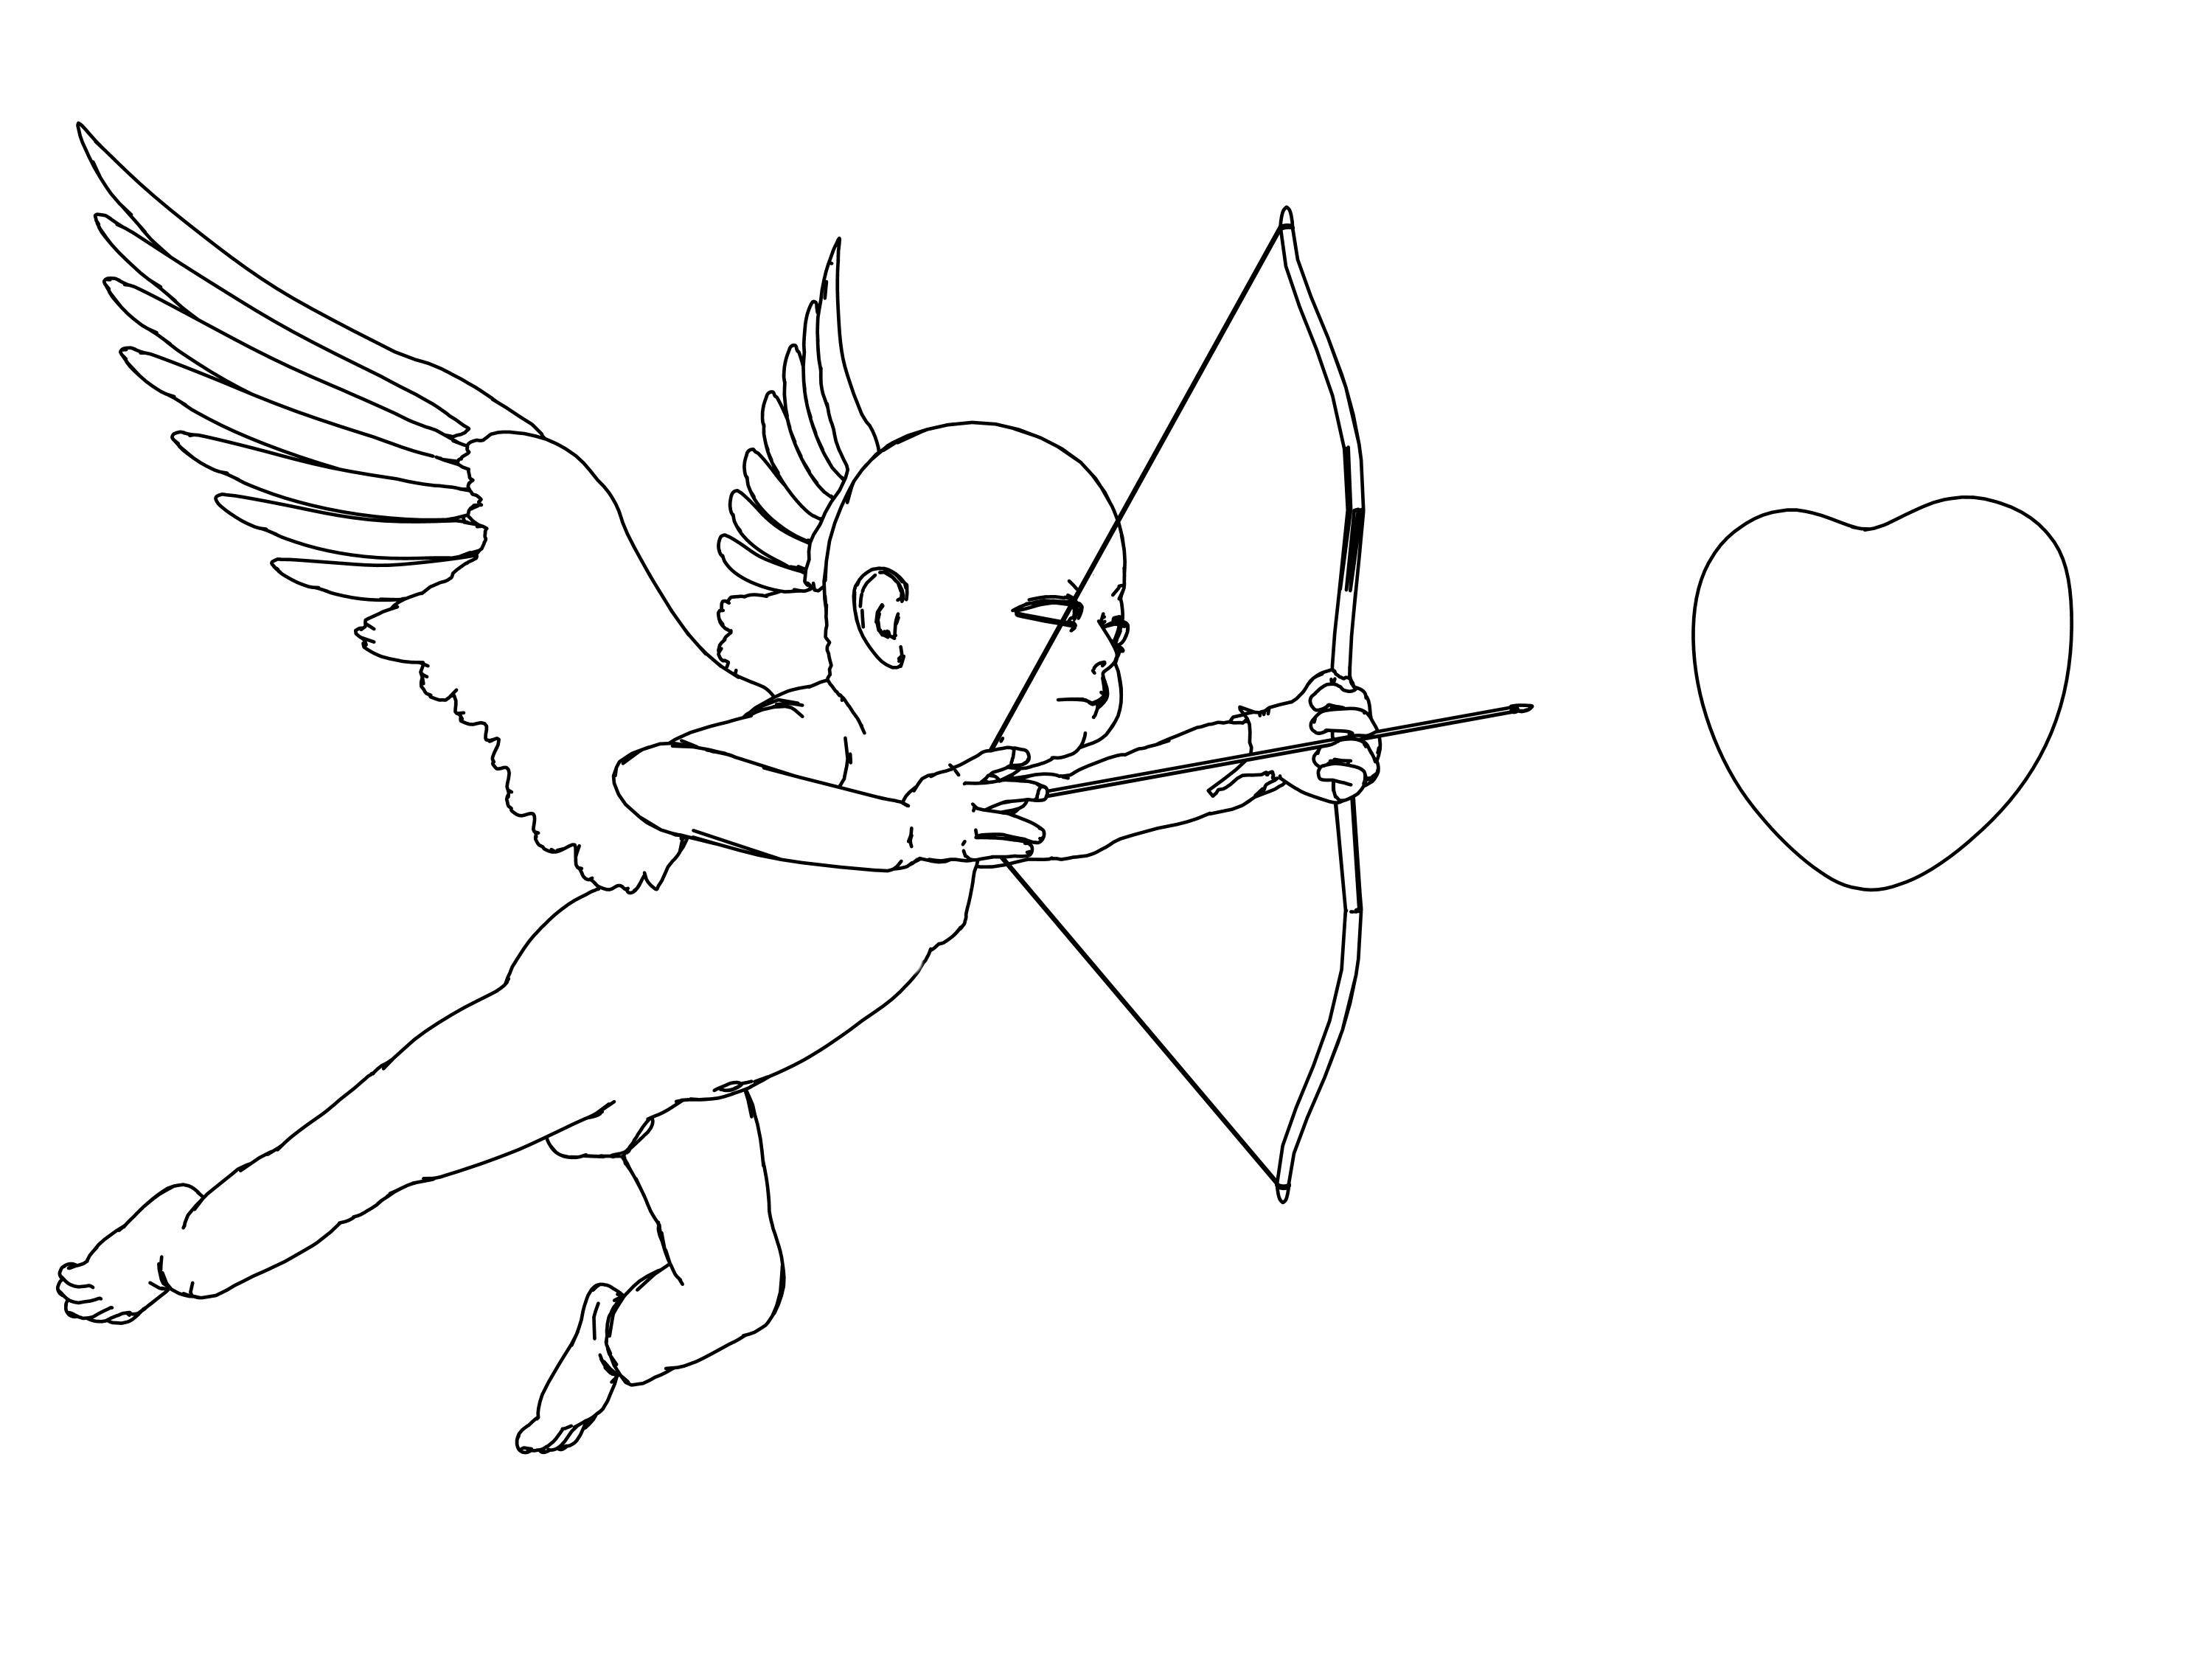 Heart With Arrow Coloring Pages at GetColorings.com | Free printable colorings pages ...3000 x 2250